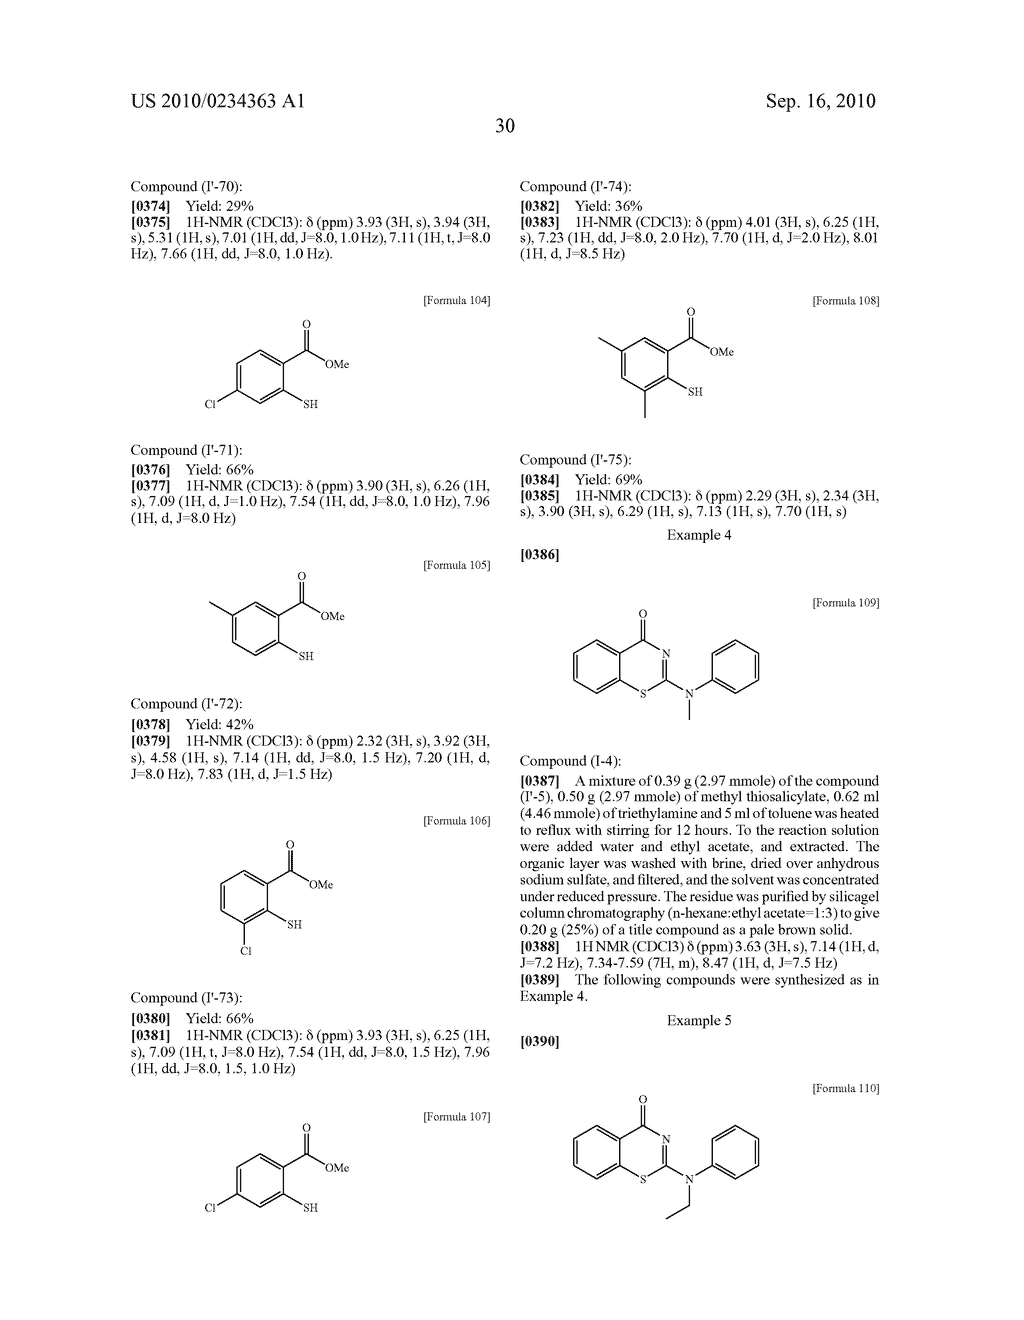 HETEROCYCLIC DERIVATIVE HAVING INHIBITORY ACTIVITY ON TYPE-I 11 DATA-HYDROXYSTEROID DEHYDROGENASE - diagram, schematic, and image 31